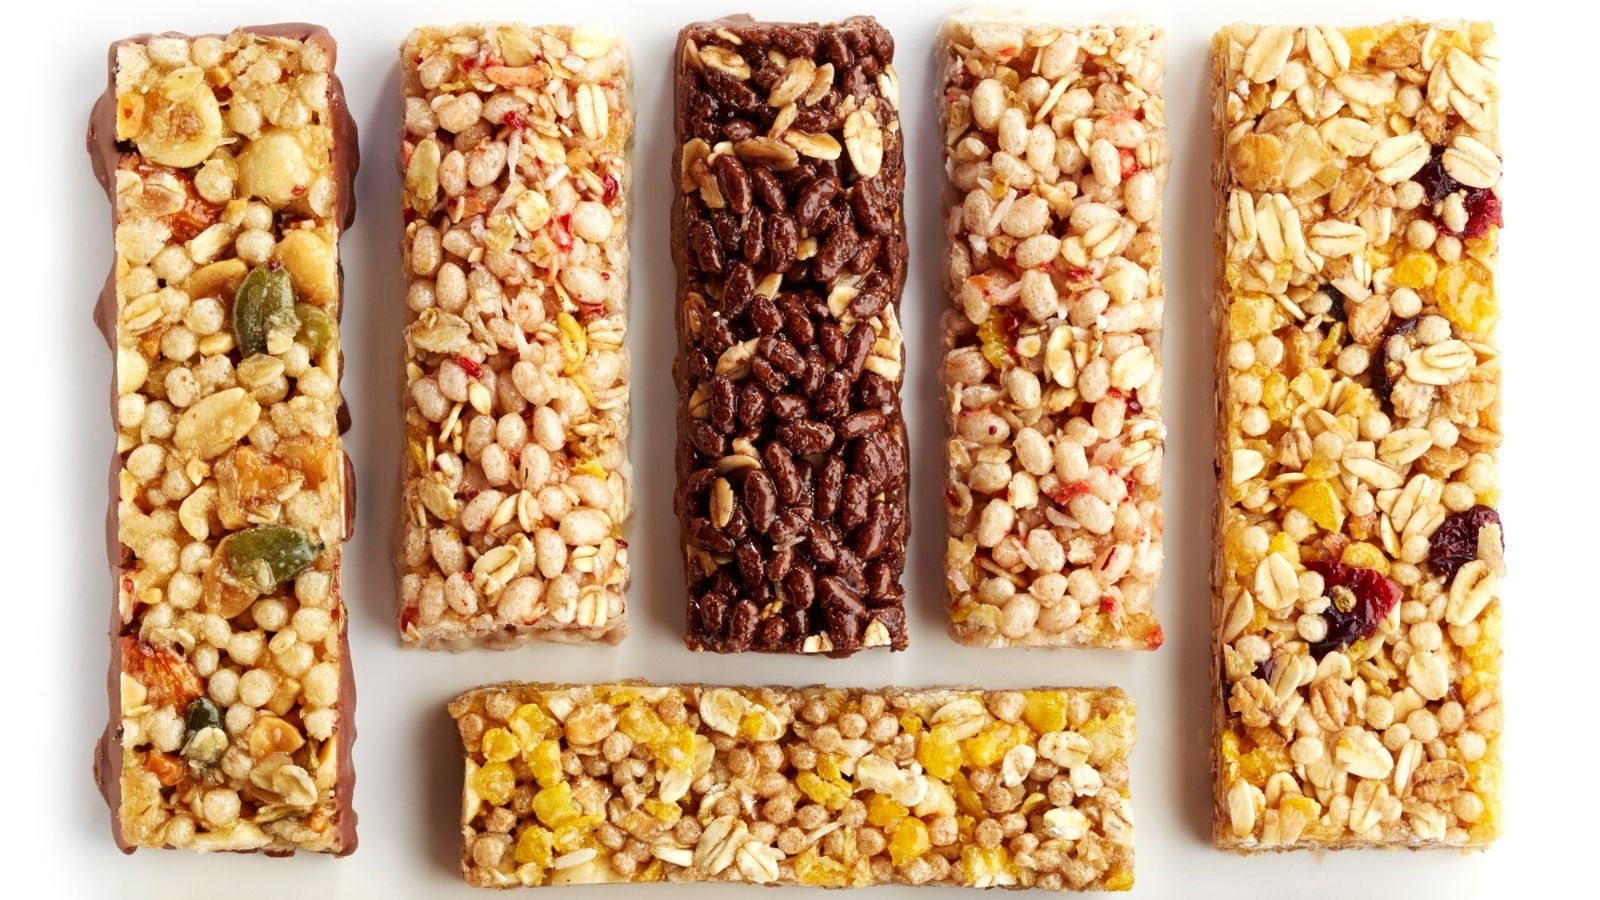 18 High Protein Snacks and Recipes that Aren’t Peanut Butter